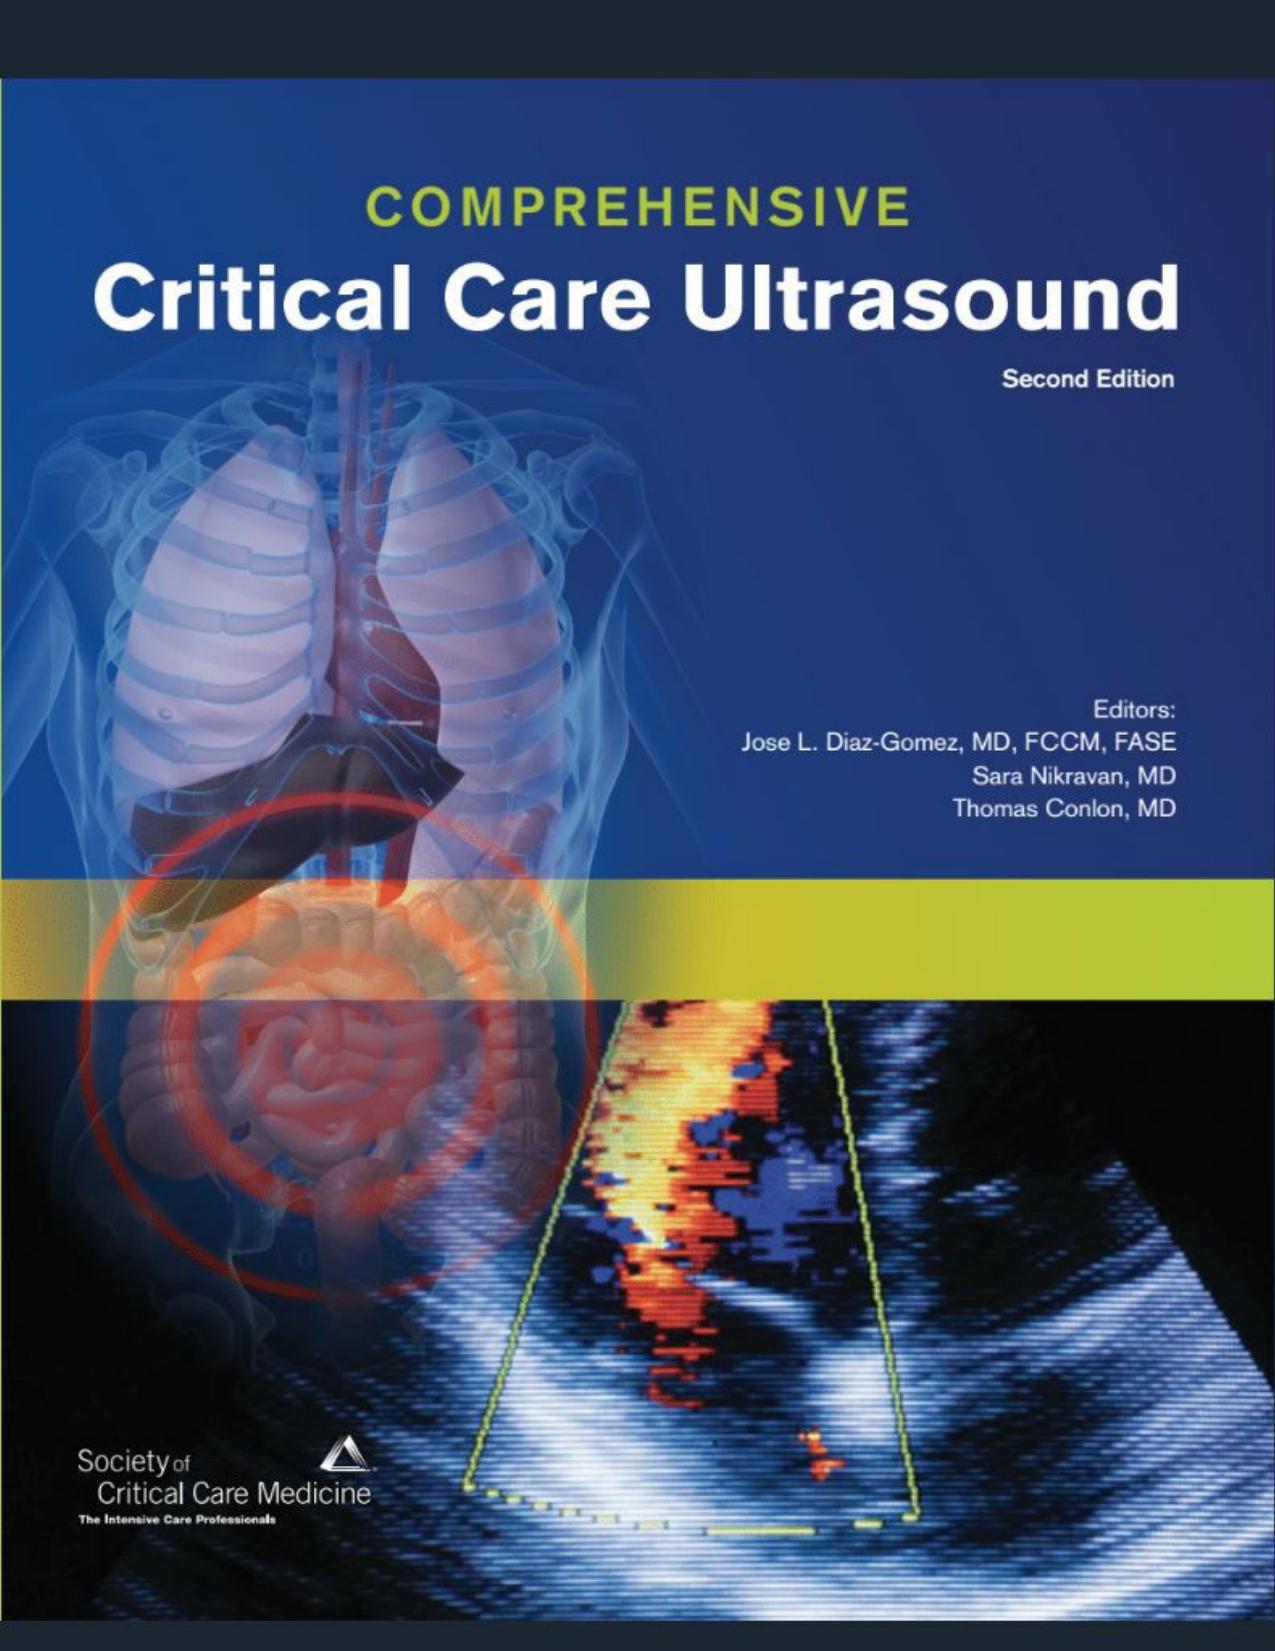 Comprehensive Critical Care Ultrasound by  The Society of Critical Care Medicine, Jose Diaz-Gomez